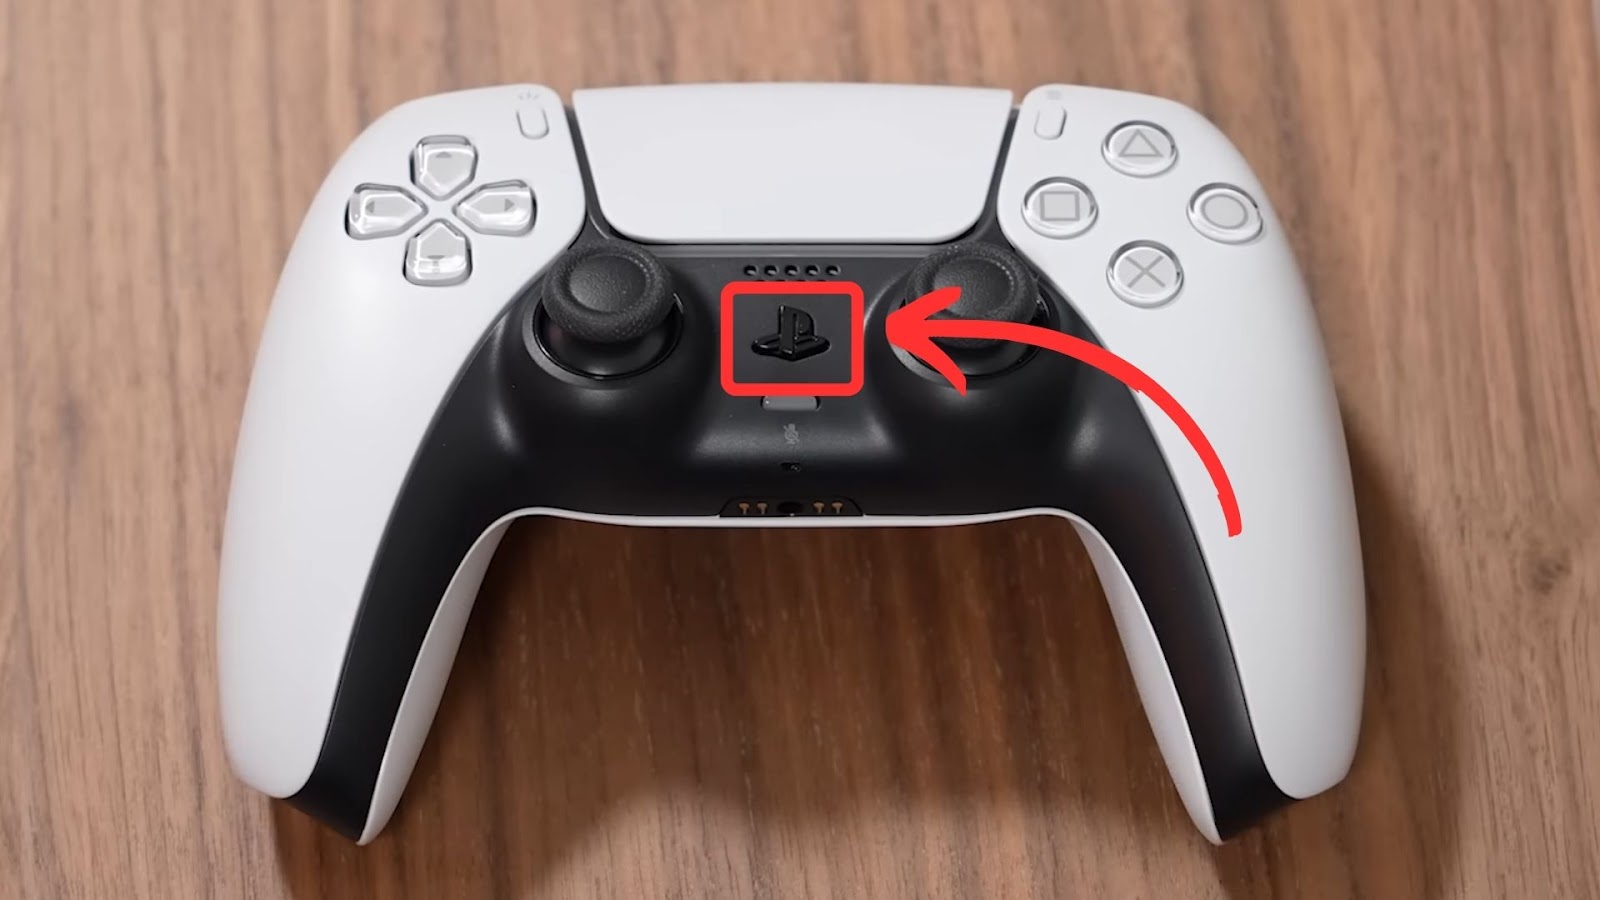 PlayStation Button On a Controller